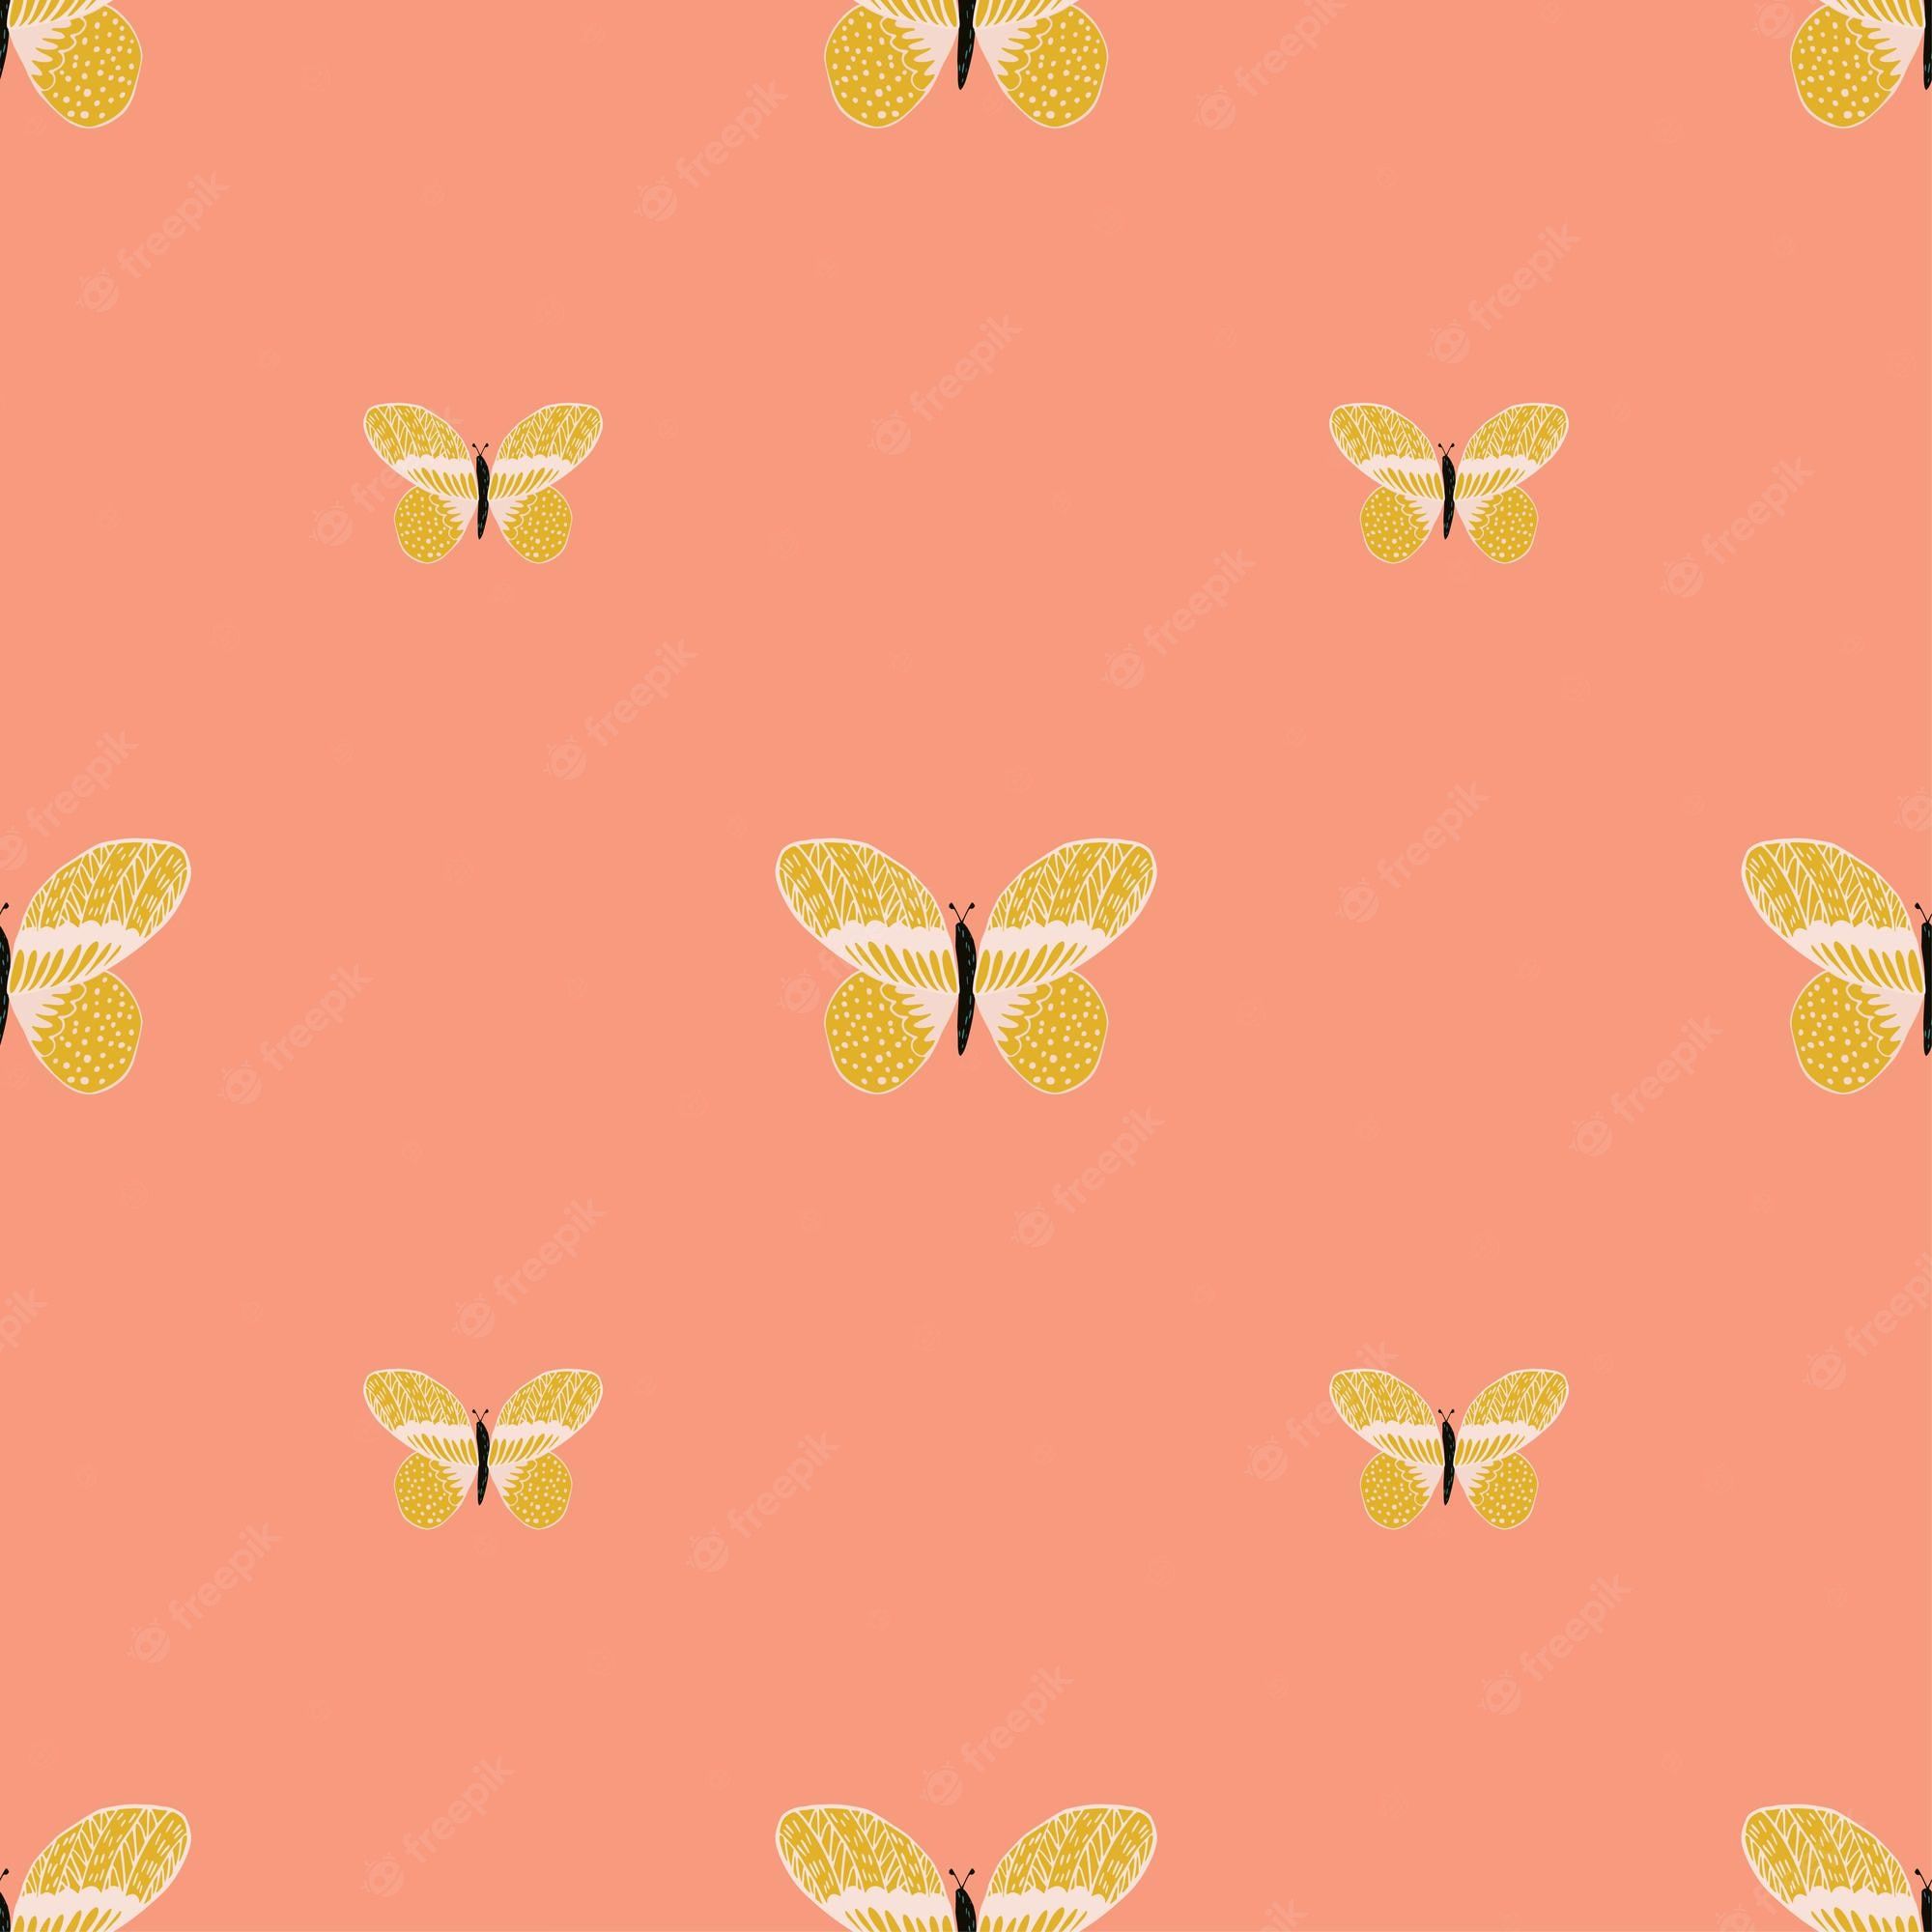 Premium Vector. Butterfly pattern seamless in freehand style. cute insect which fly in a meadow on colorful background. vector illustration for textile prints, fabric, banners, backdrops and wallpaper